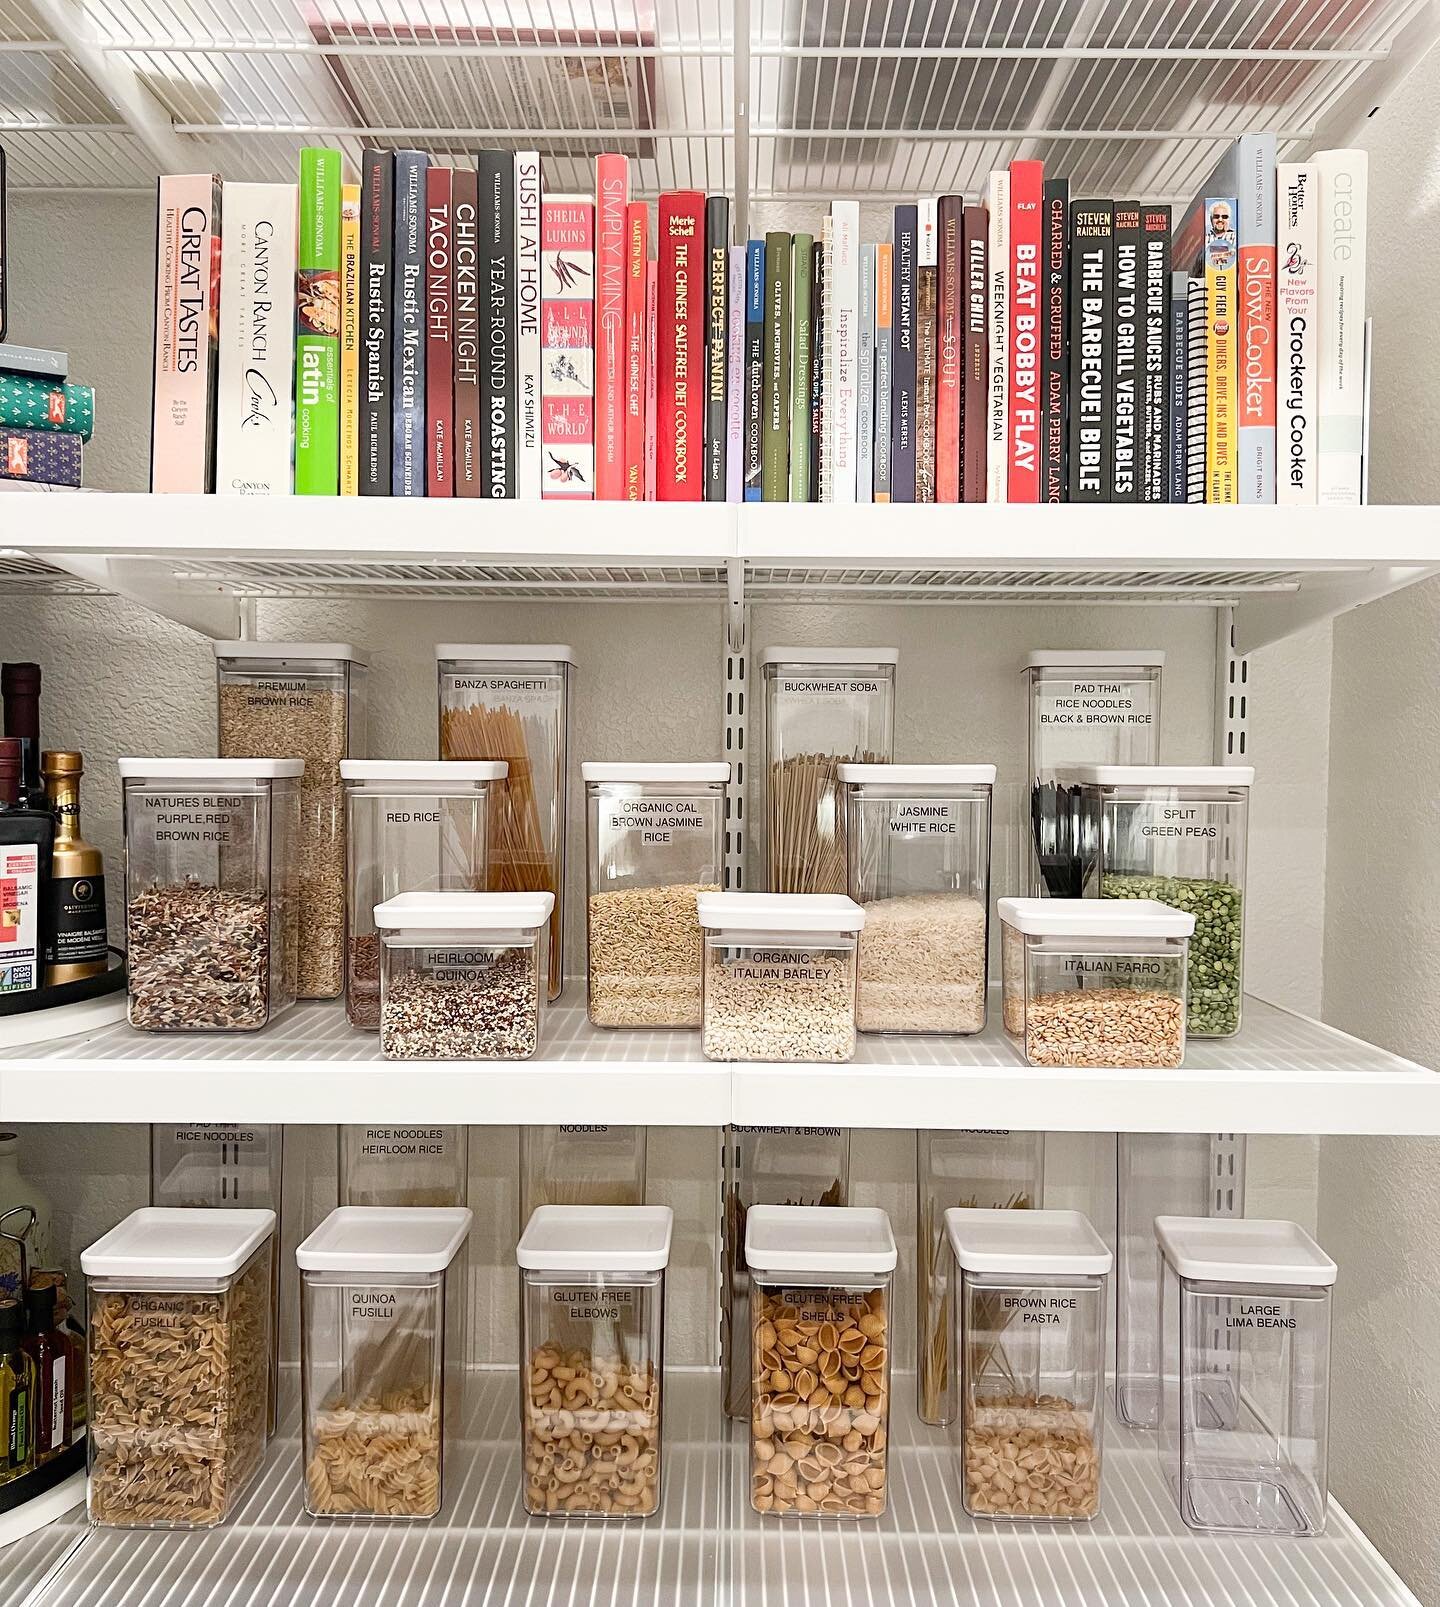 ✨ l a b e l ✨ 
We took this pantry to the next level with custom elfa + alllll the labels! Our customer had an impressive amount of dry goods so we decanted and labeled each one. We loved how it turned out!